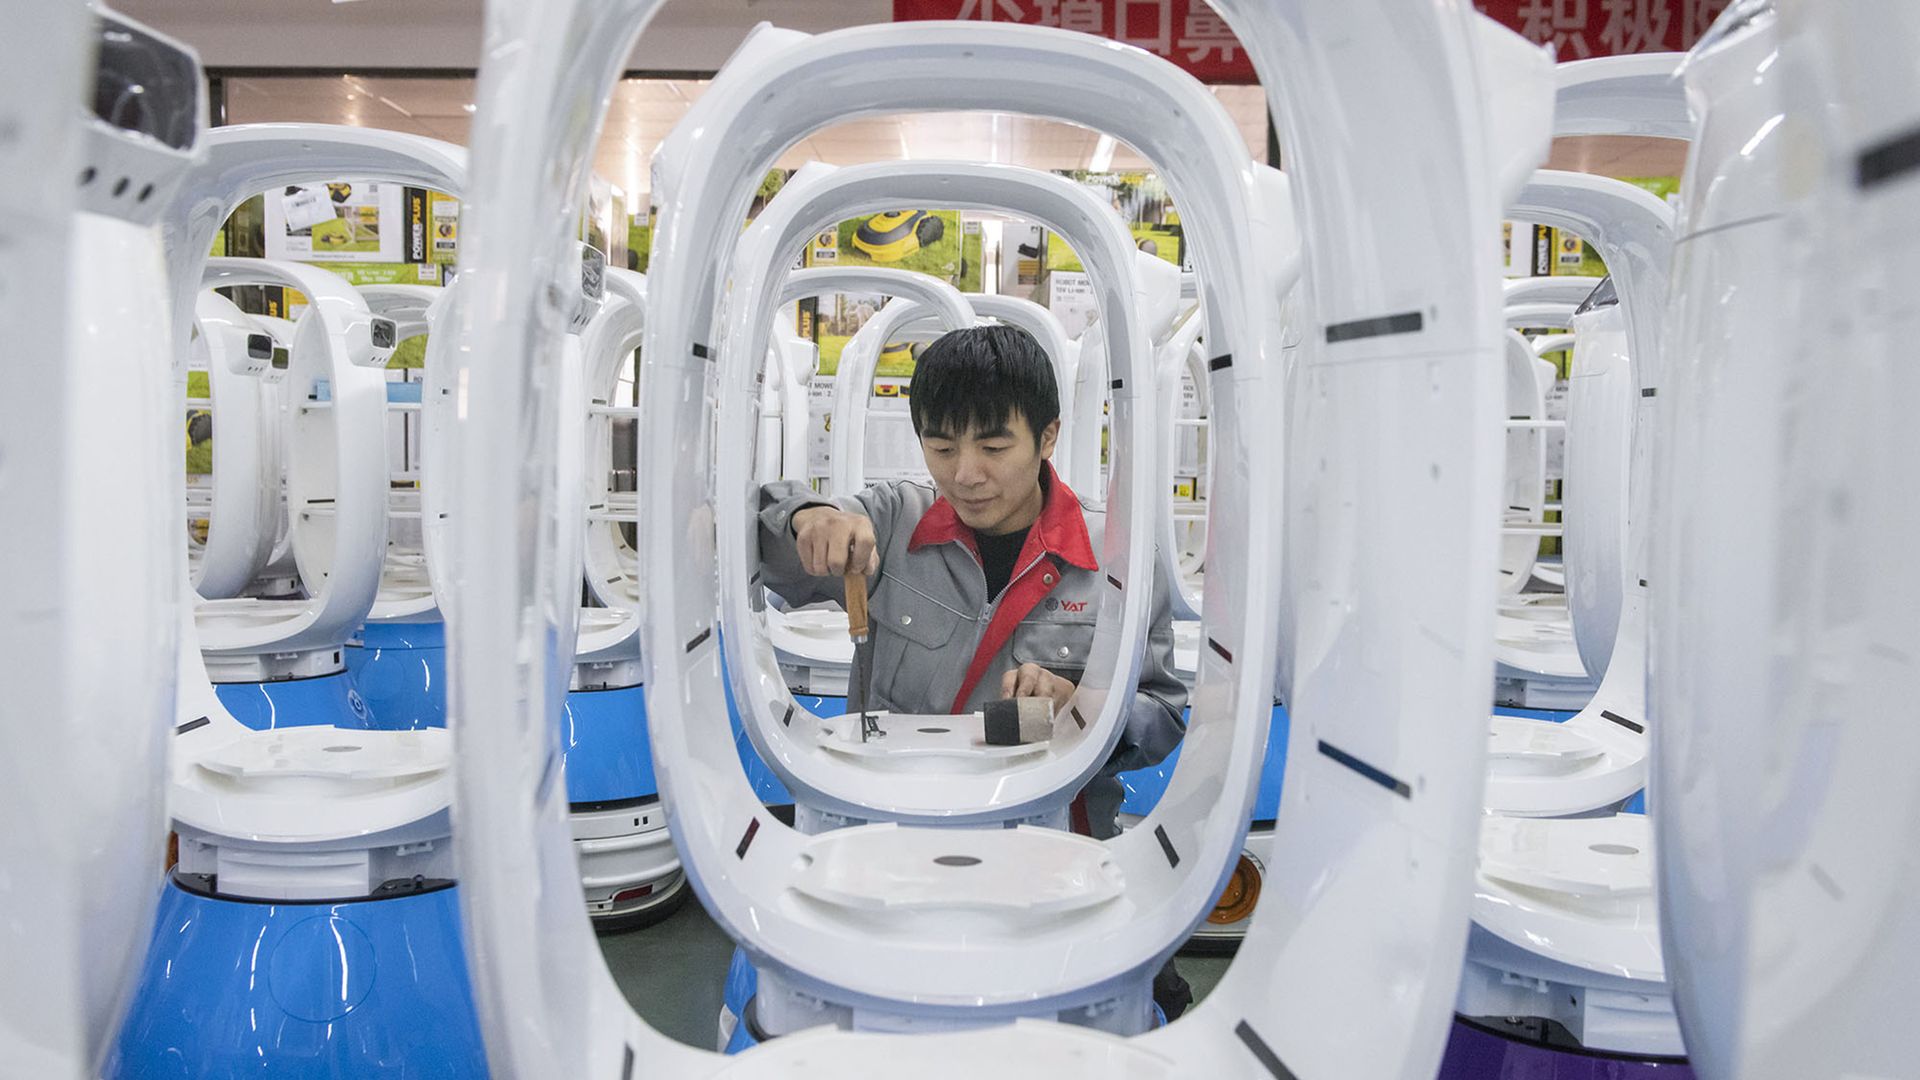 Technician from Zhejiang YAT Electrical Appliance Co.,Ltd checks the service robots which will be used for food and medicine delivery, on January 17, 2021 in Jiaxing, Zhejiang Province of China.